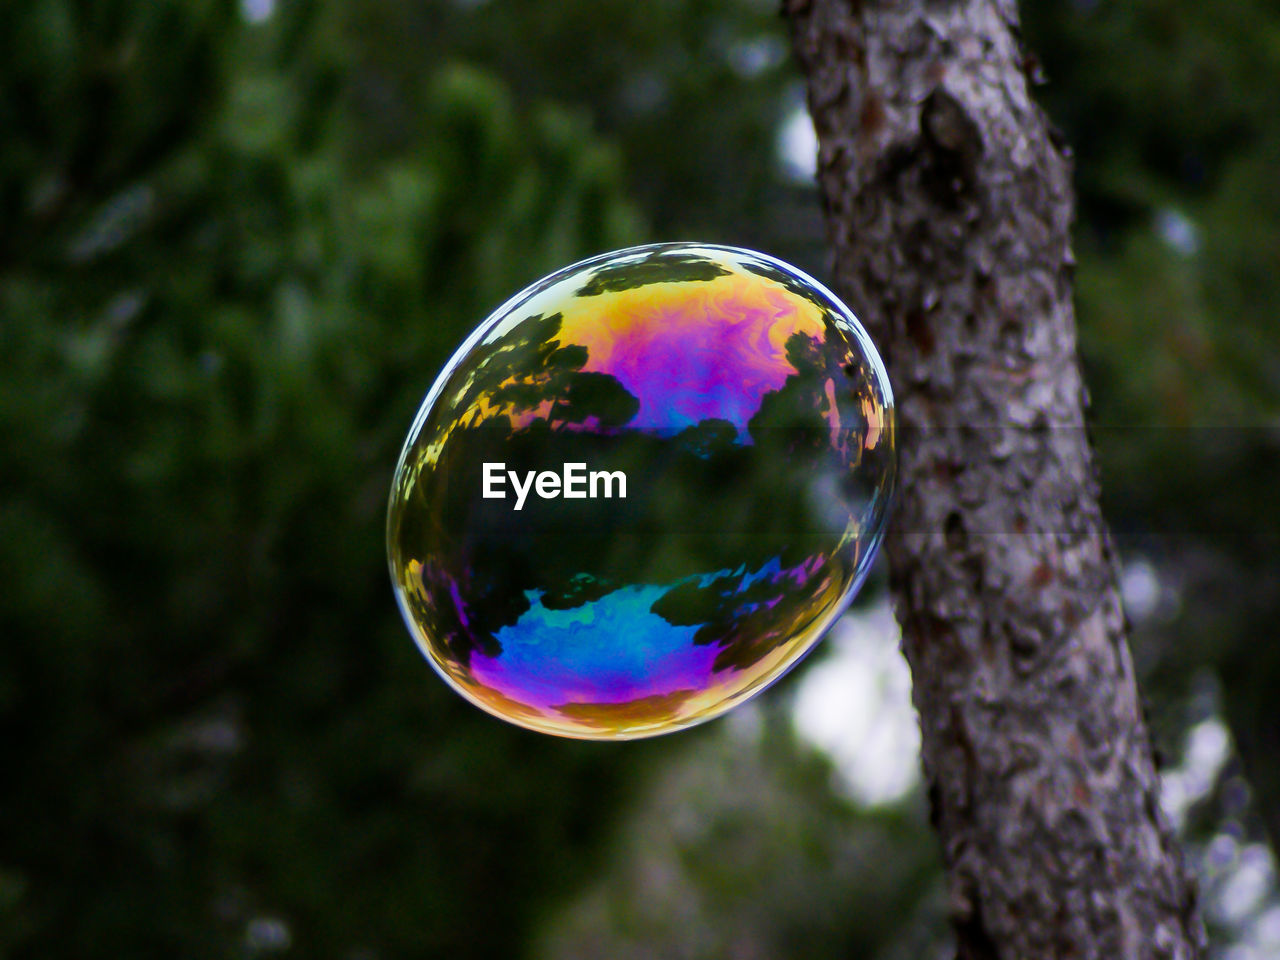 bubble, tree, soap sud, fragility, liquid bubble, plant, nature, mid-air, sphere, multi colored, bubble wand, reflection, focus on foreground, light, green, transparent, shape, tree trunk, outdoors, day, spectrum, trunk, geometric shape, blue, no people, forest, yellow, shiny, refraction, close-up, single object, soap, lightweight, flying, leaf, blowing, beauty in nature, circle, environment, sunlight, water, rainbow